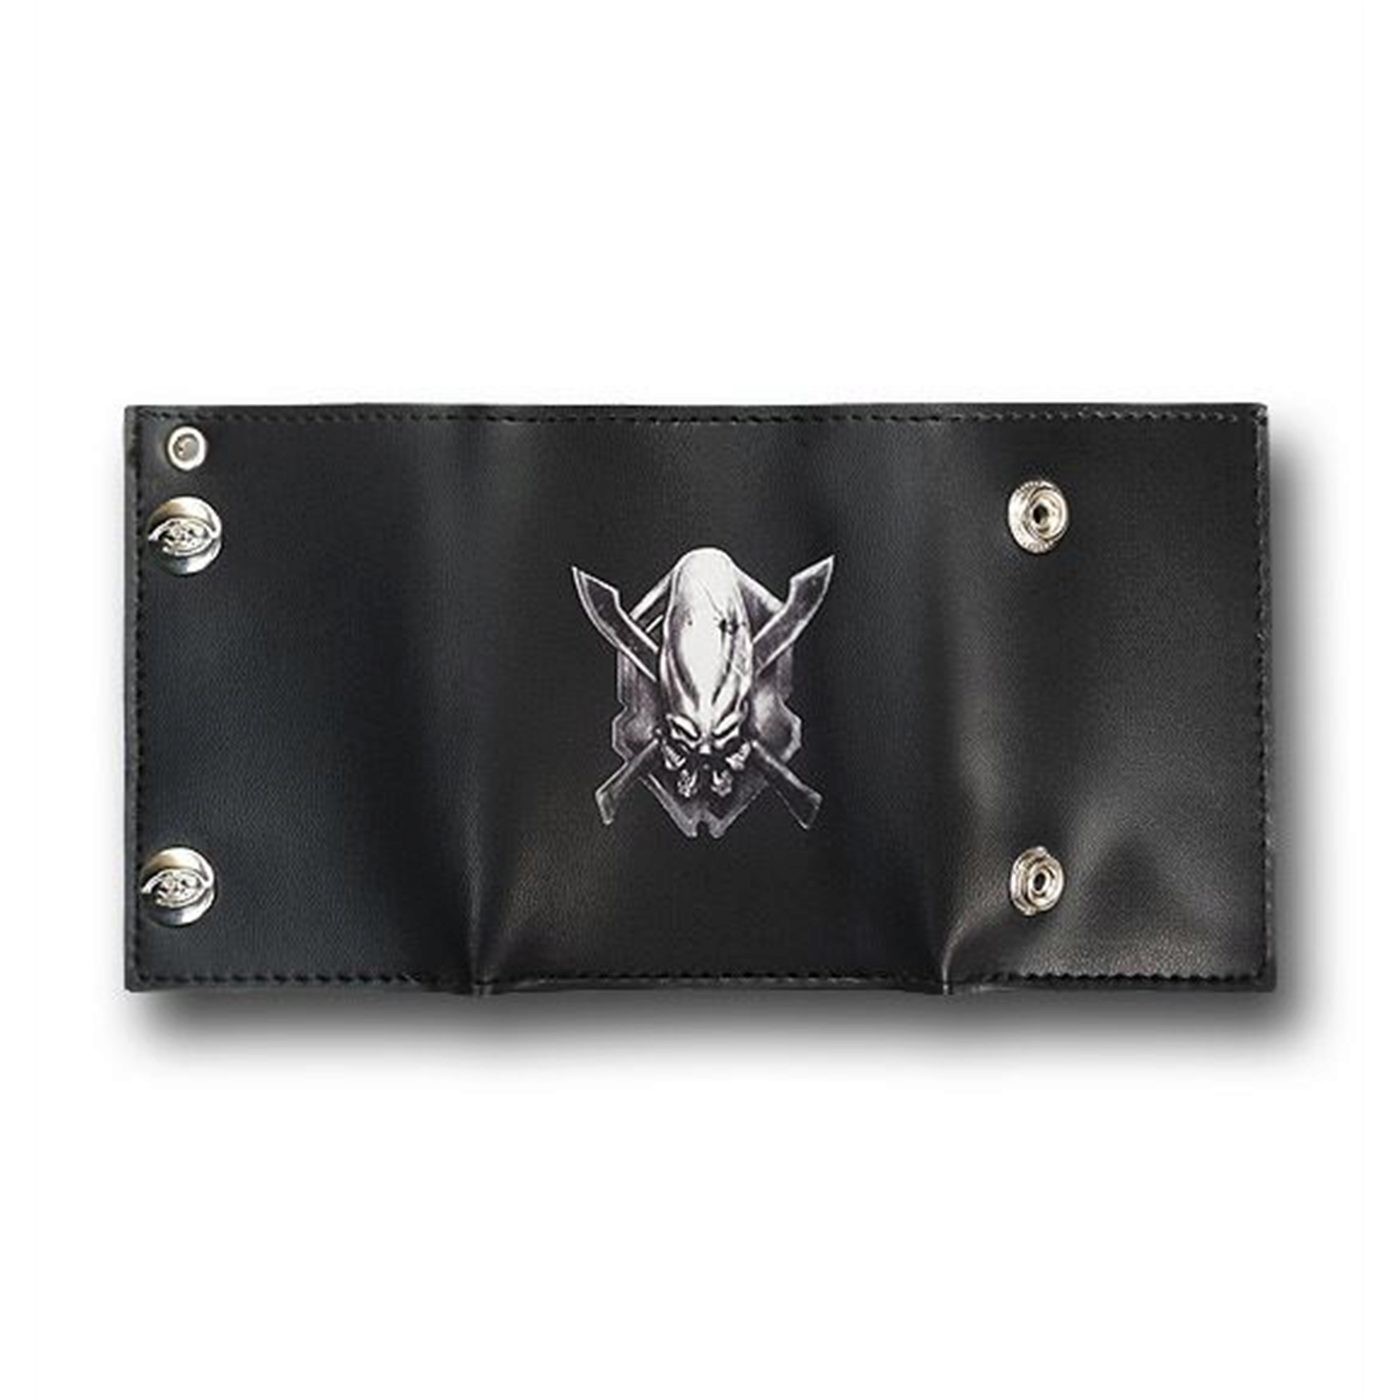 HALO Black Covenant Chain Wallet